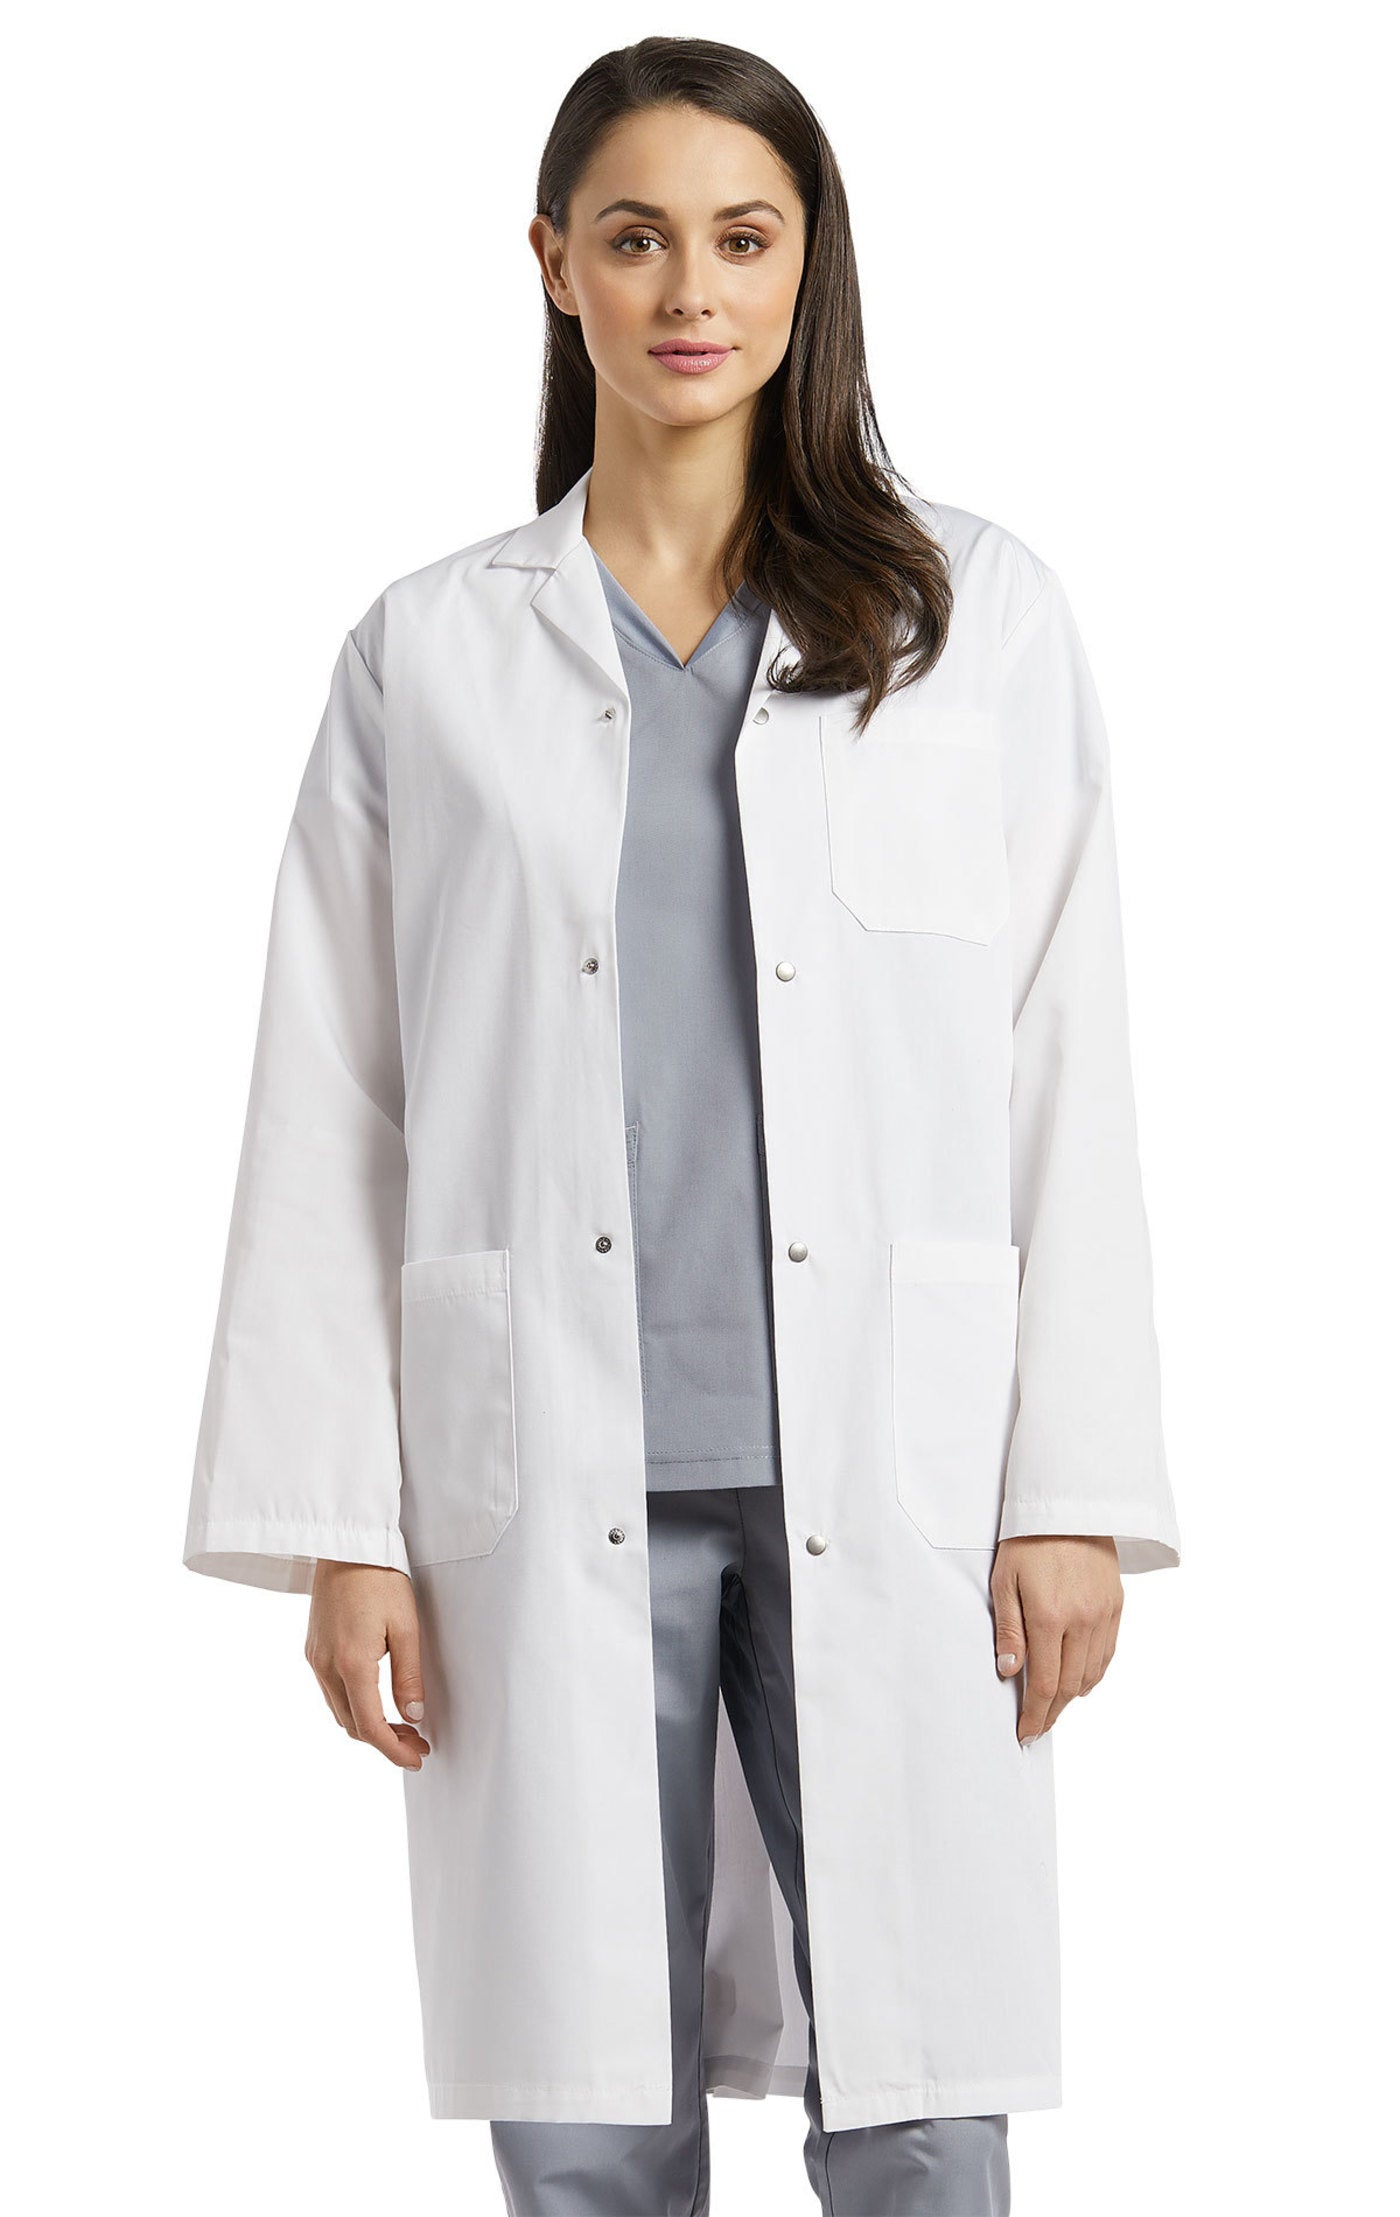 2068S Unisex White Cross Lab Coat with Snap Closure Buttons